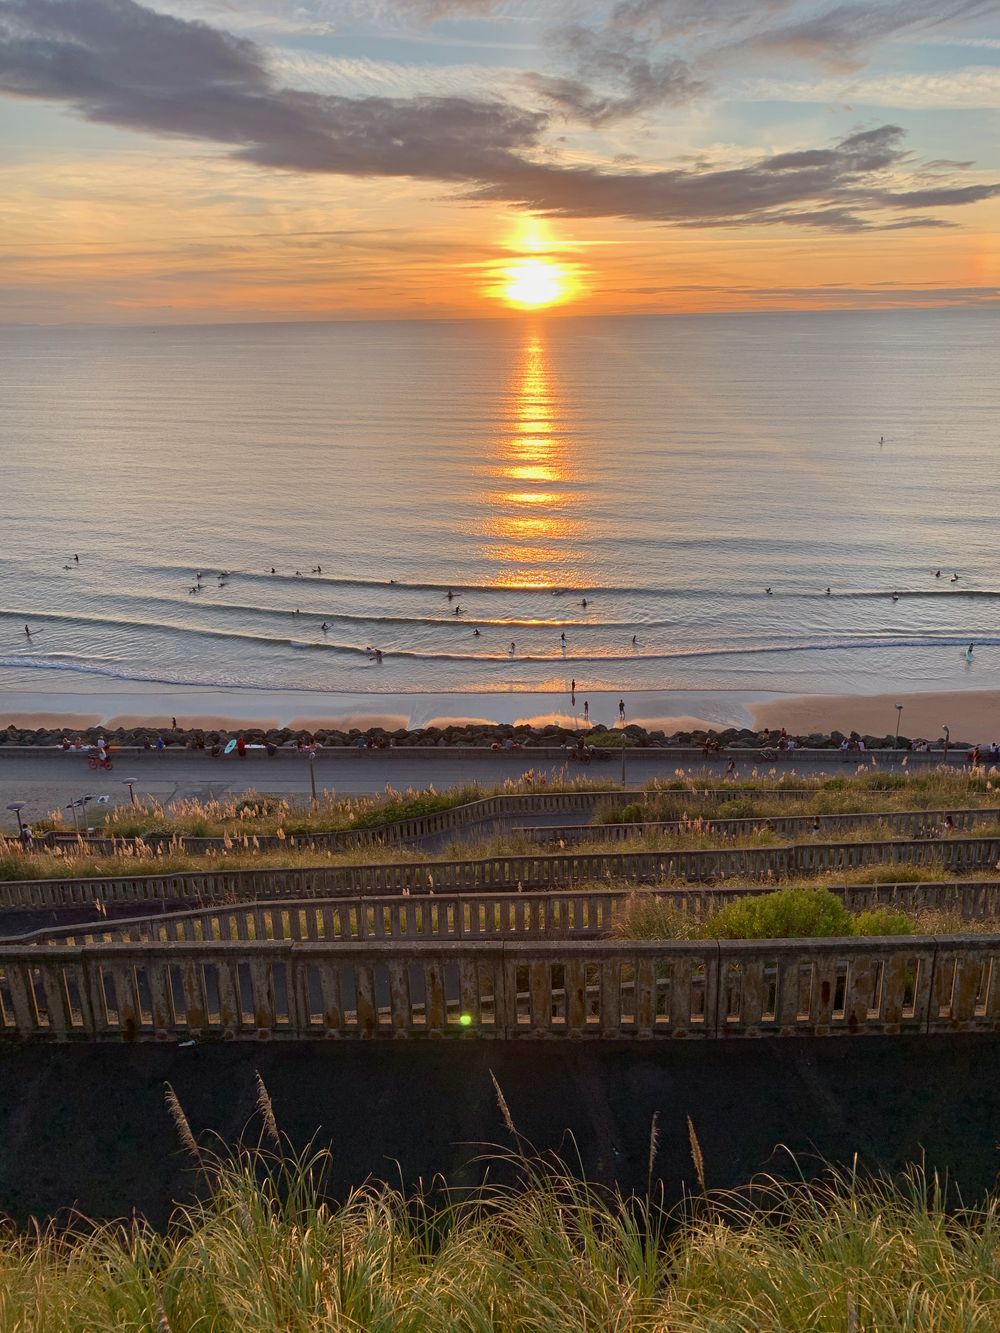 Where to Watch the Sunset in Biarritz, France